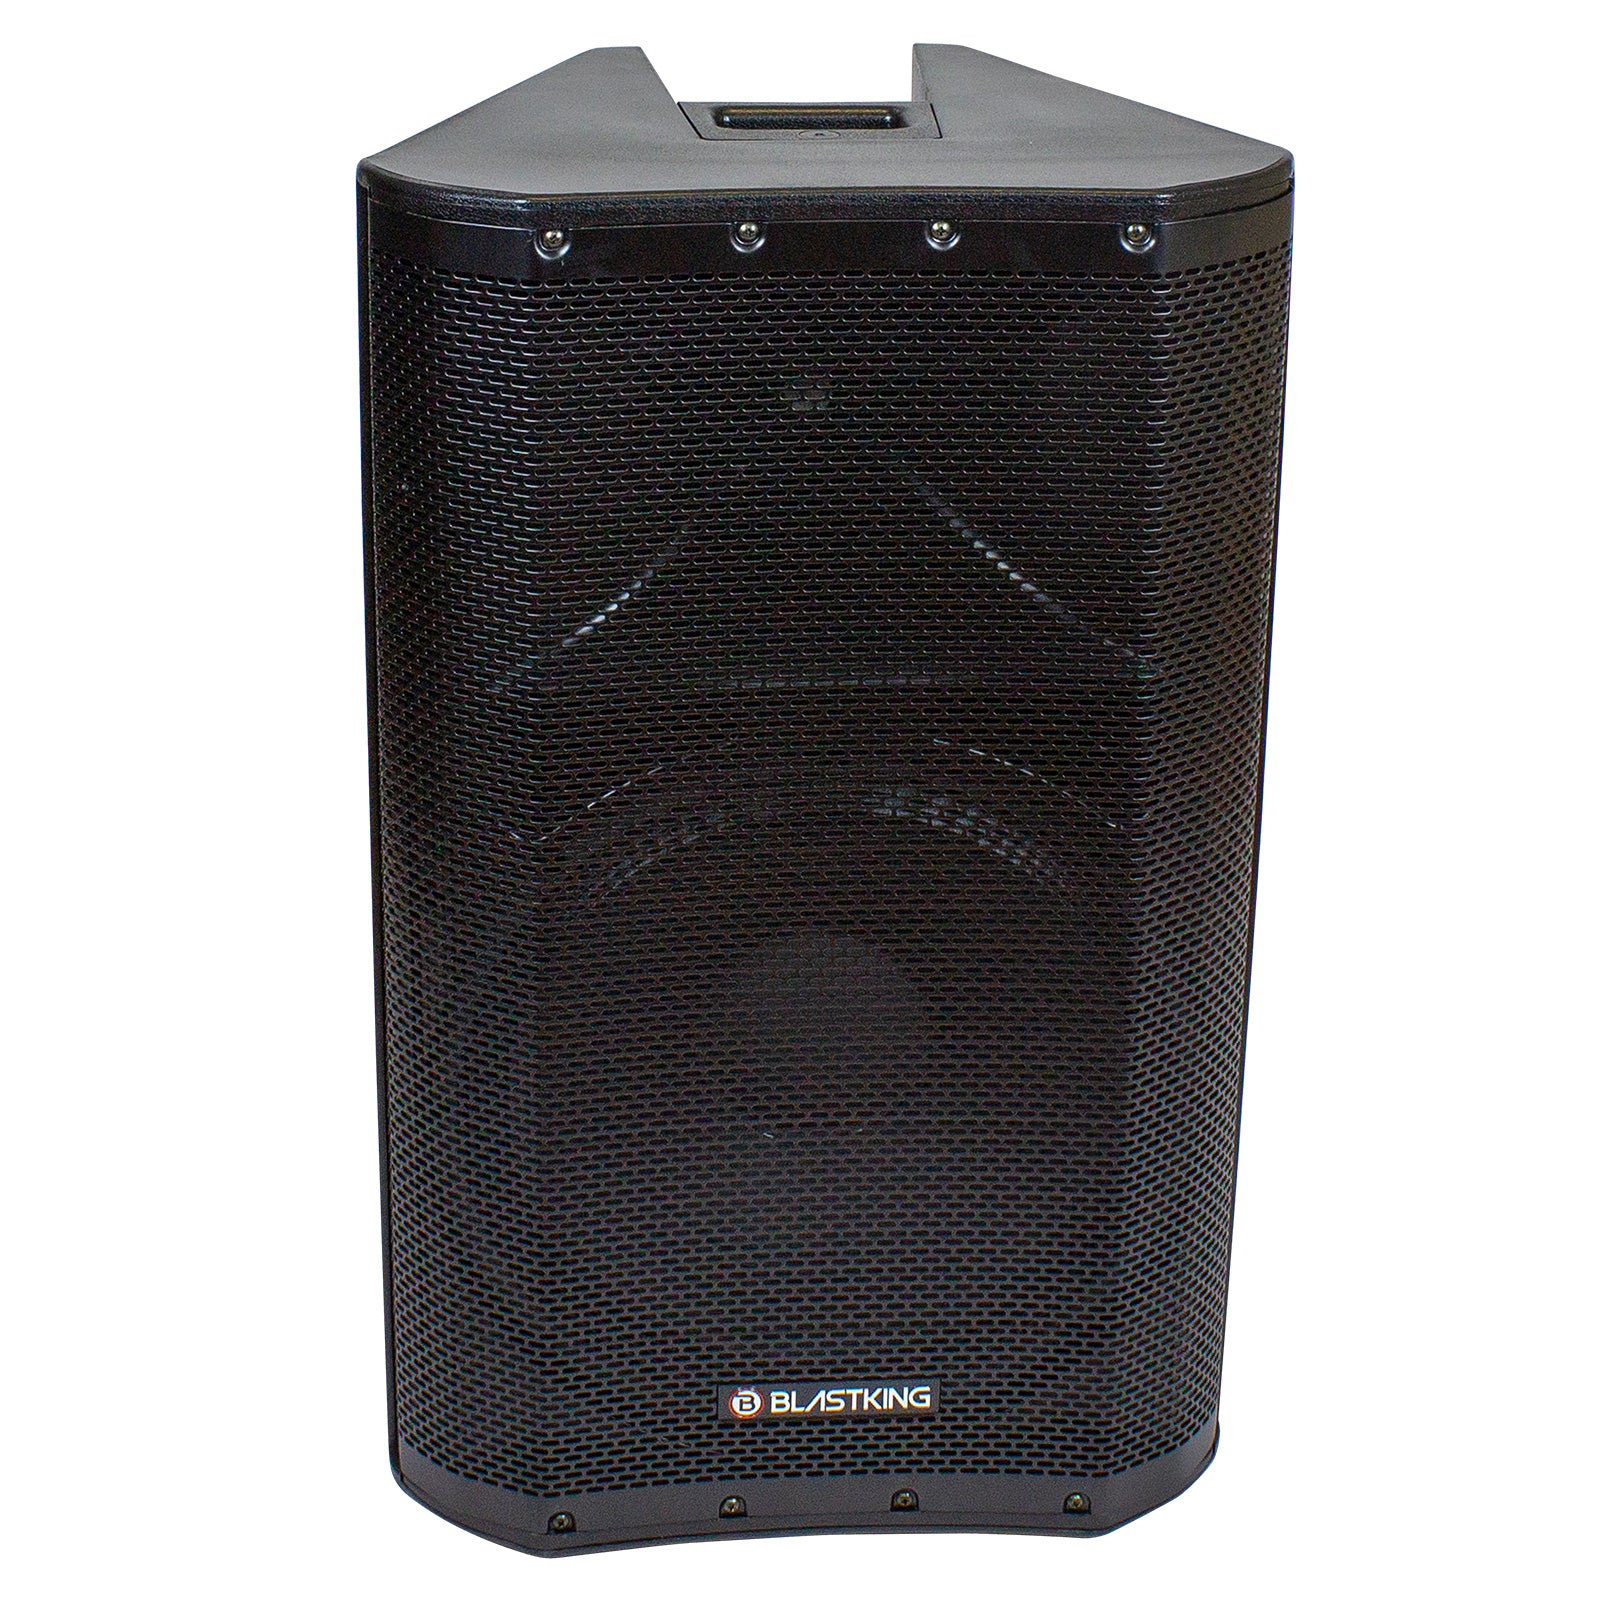 Blastking XS215A 1000 Watts 15 inch 2-way Active Loudspeaker w/Bluetooth and MP3 Player